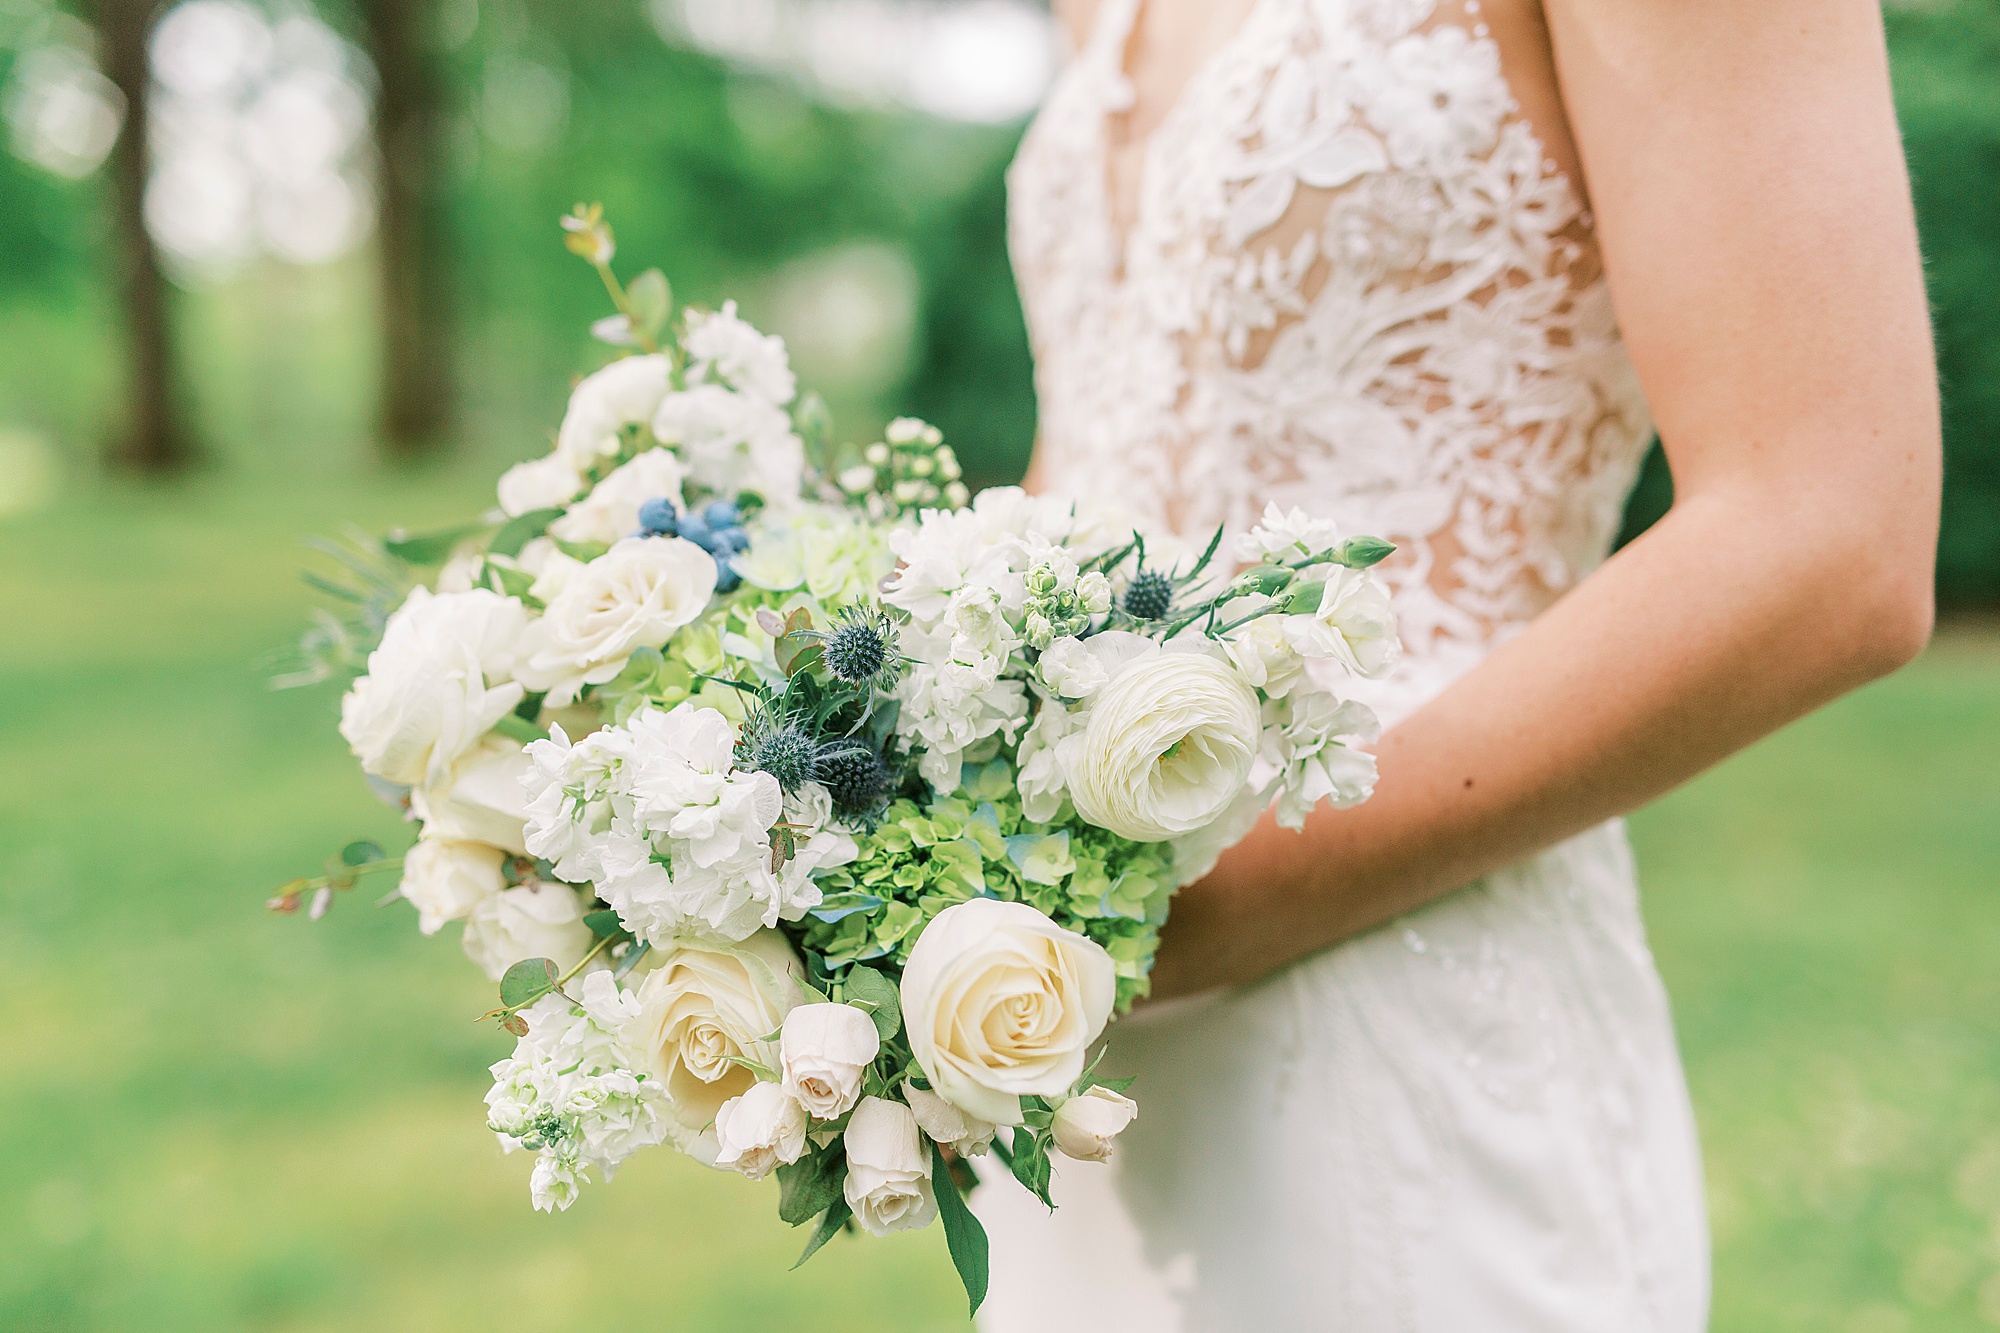 bride's white and green bouquet for spring wedding